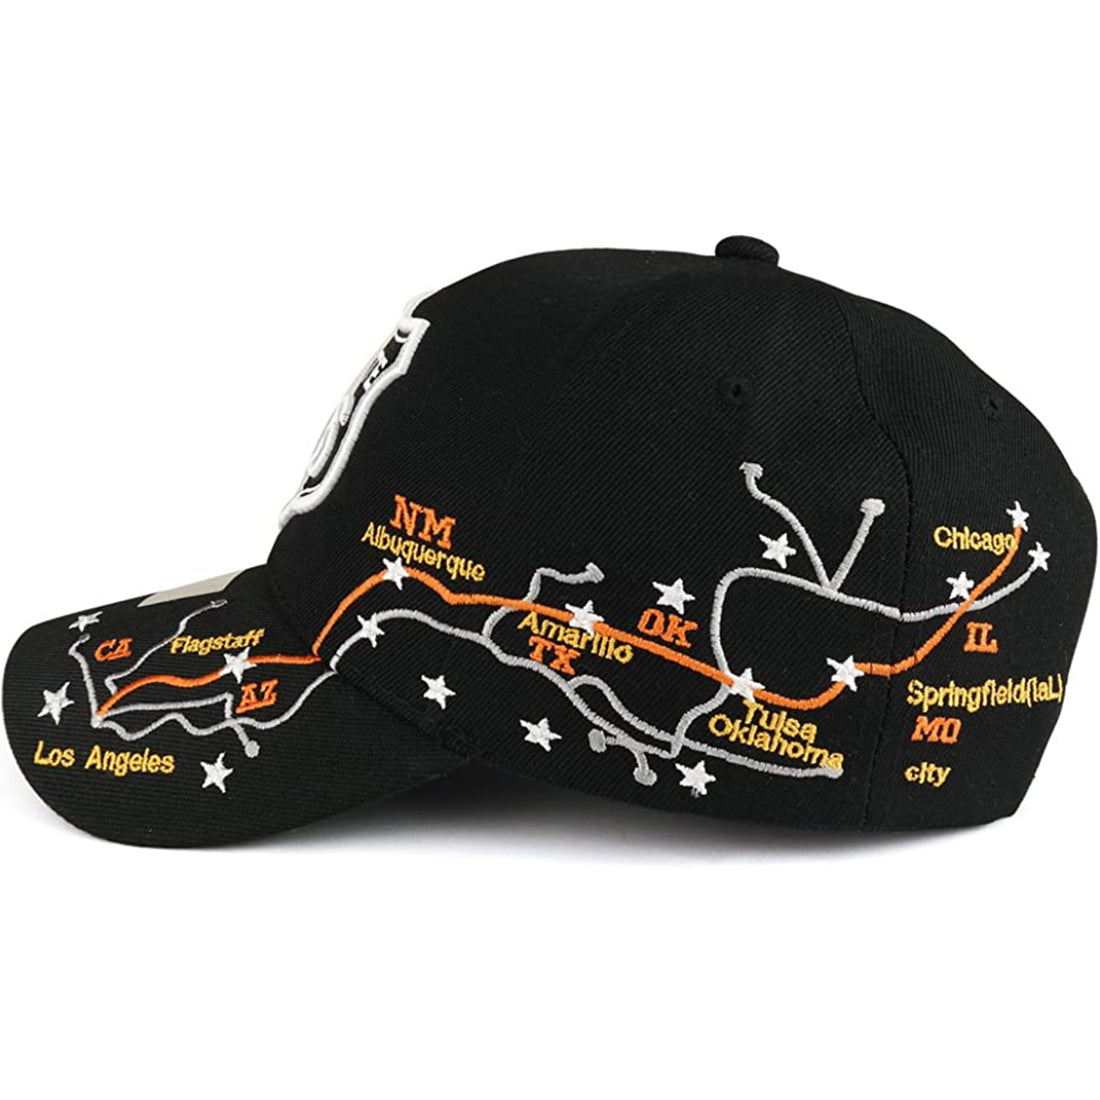 Trendy Apparel Shop Route 66 Map City Names Embroidered Structured Baseball Cap